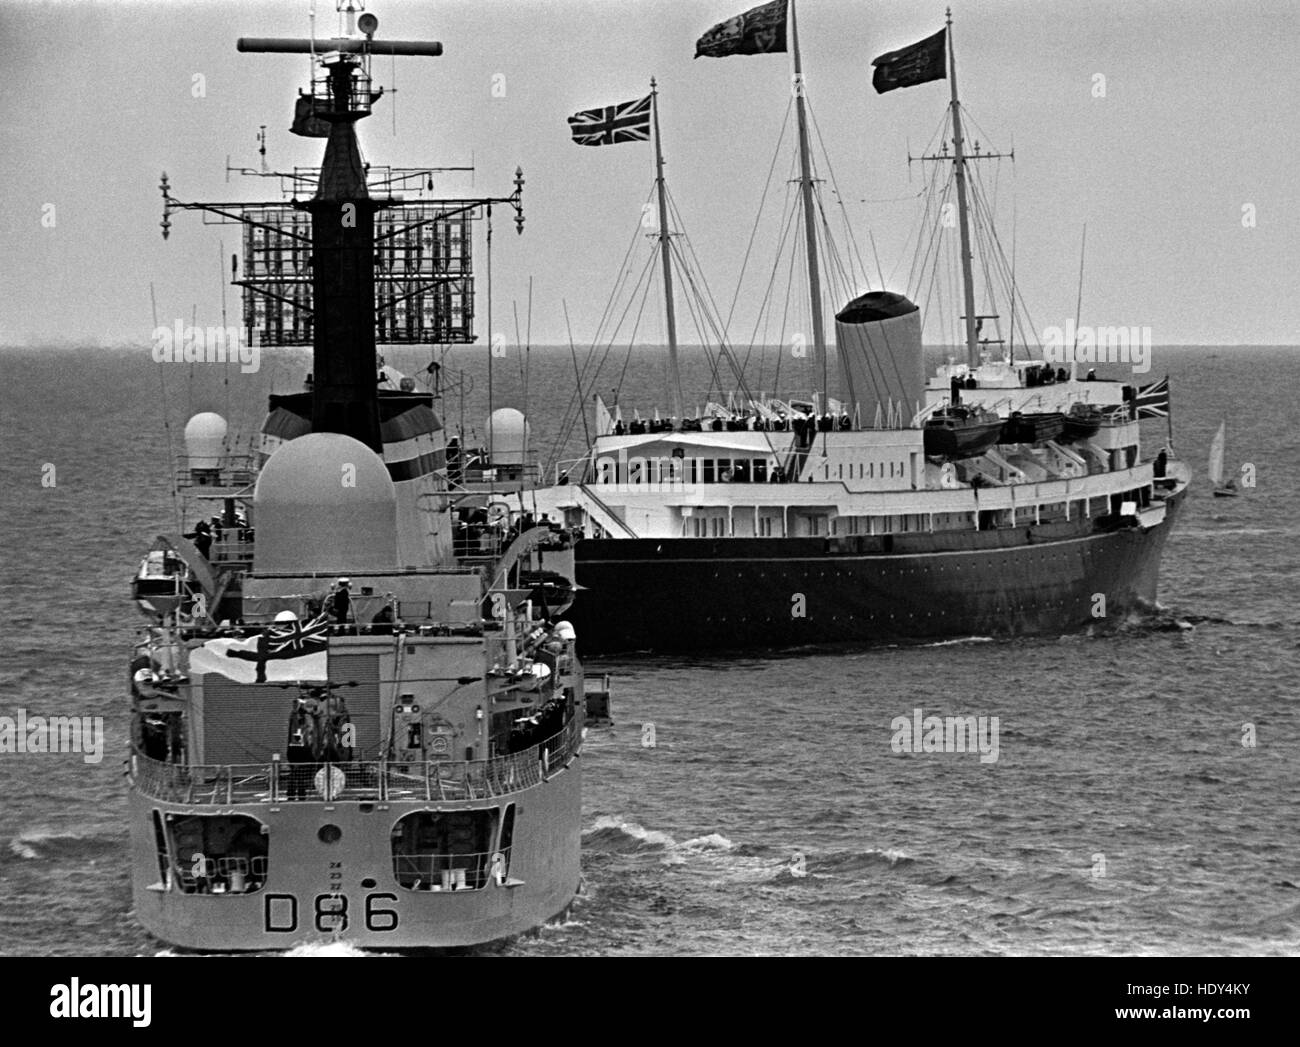 AJAX NEWS PHOTOS. 1977. SPITHEAD, ENGLAND. - SILVER JUBILEE FLEET REVIEW - THE ROYAL YACHT BRITANNIA WITH H.M.QUEEN ELIZABETH II EMBARKED, WITH THE NEWLY COMPLETED DESTROYER BIRMINGHAM ASTERN, IN A SPITHEAD REVIEW OF THE FLEET, JULY 1977.  PHOTO:JONATHAN EASTLAND/AJAX REF:SJFR77 20 Stock Photo